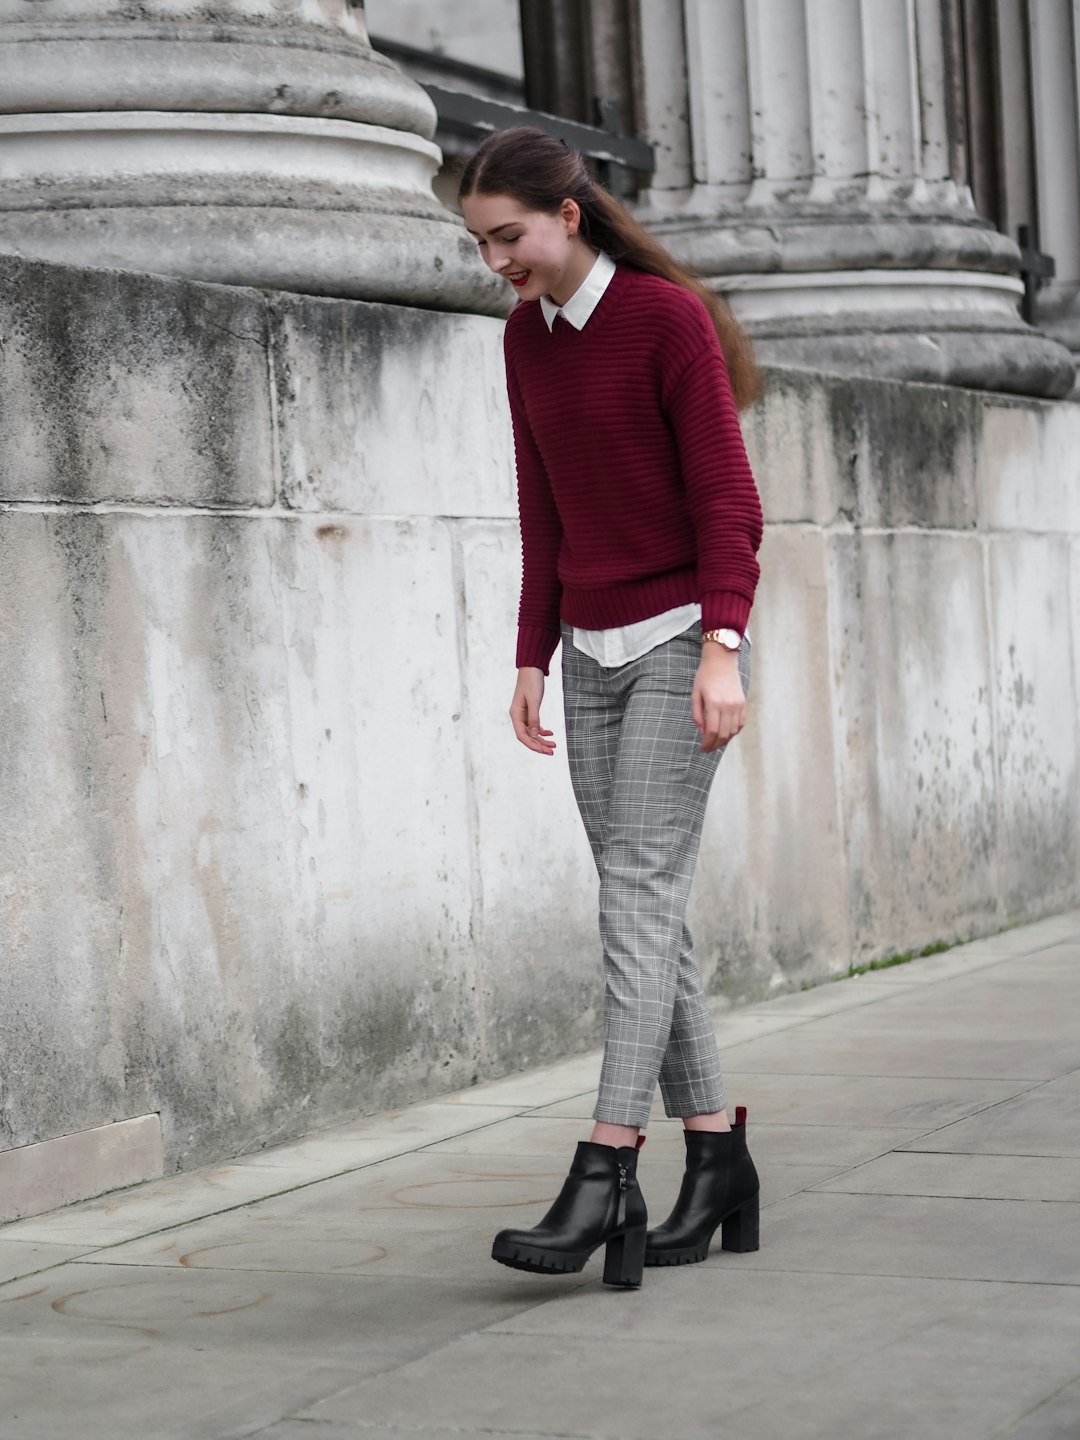 woman in red sweater and gray pants standing on sidewalk during daytime